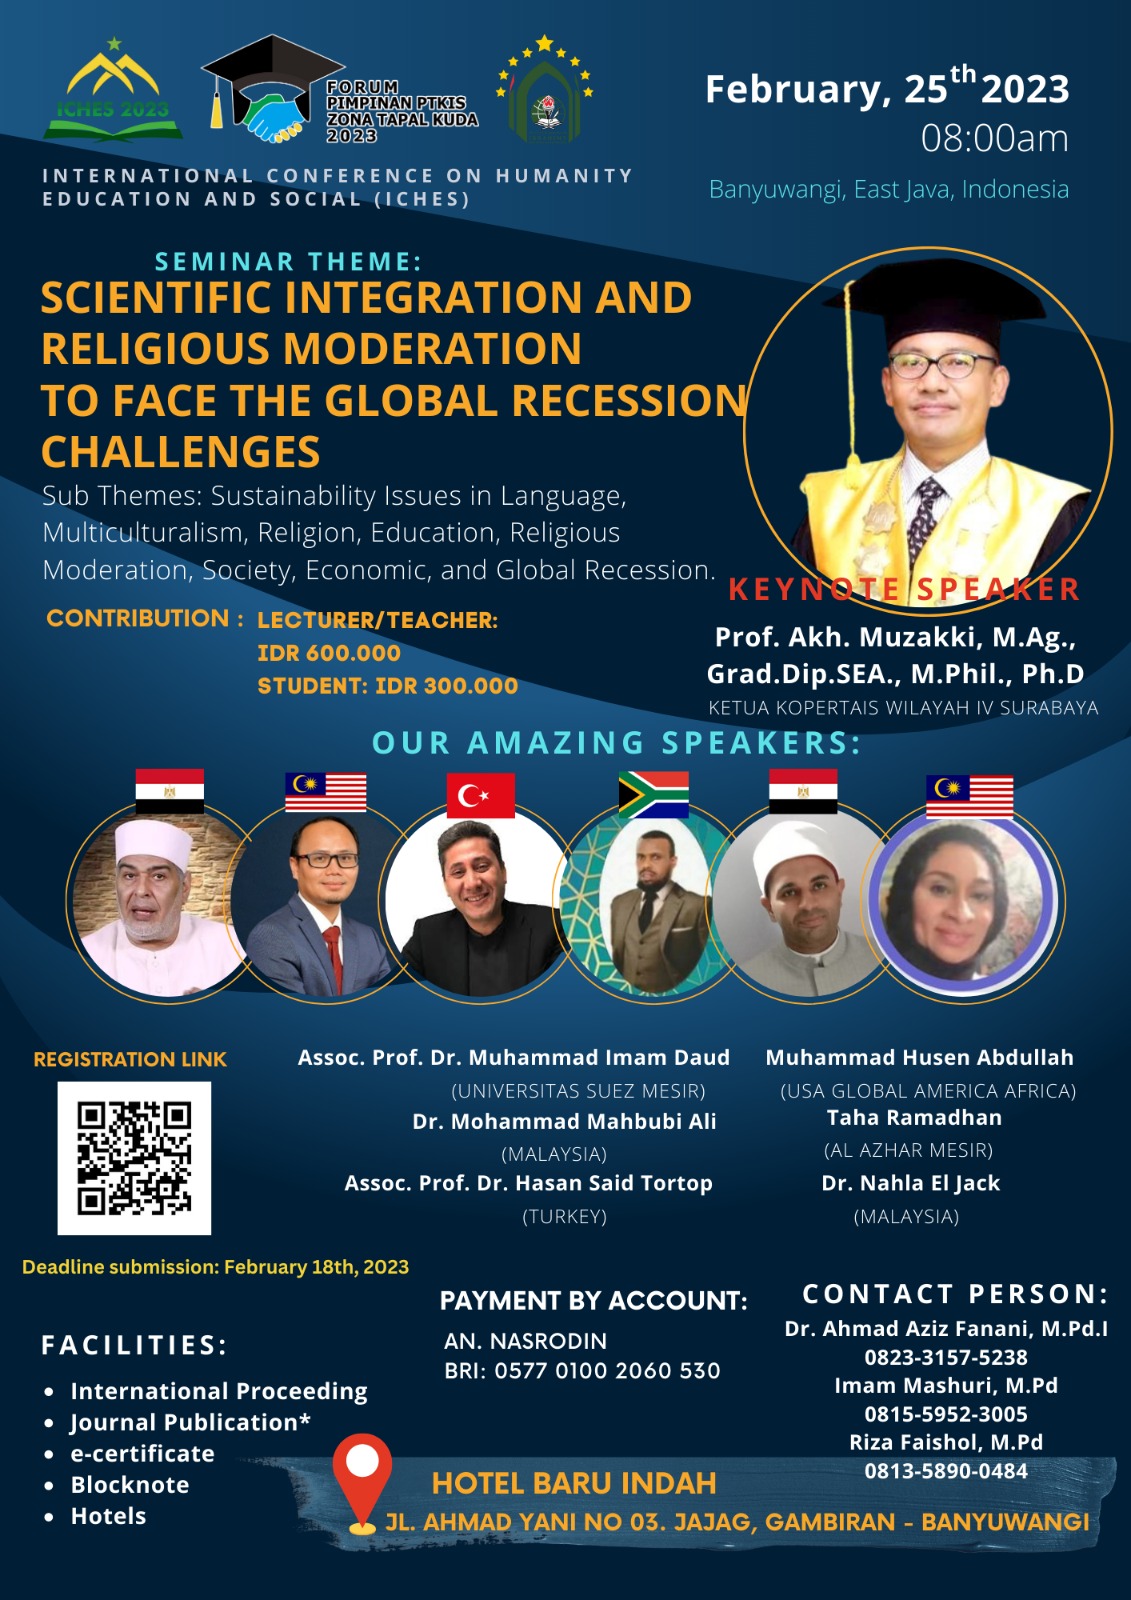 INTERNATIONAL CONFERENCE ON HUMANITY EDUCATION AND SOCIAL (ICHES)